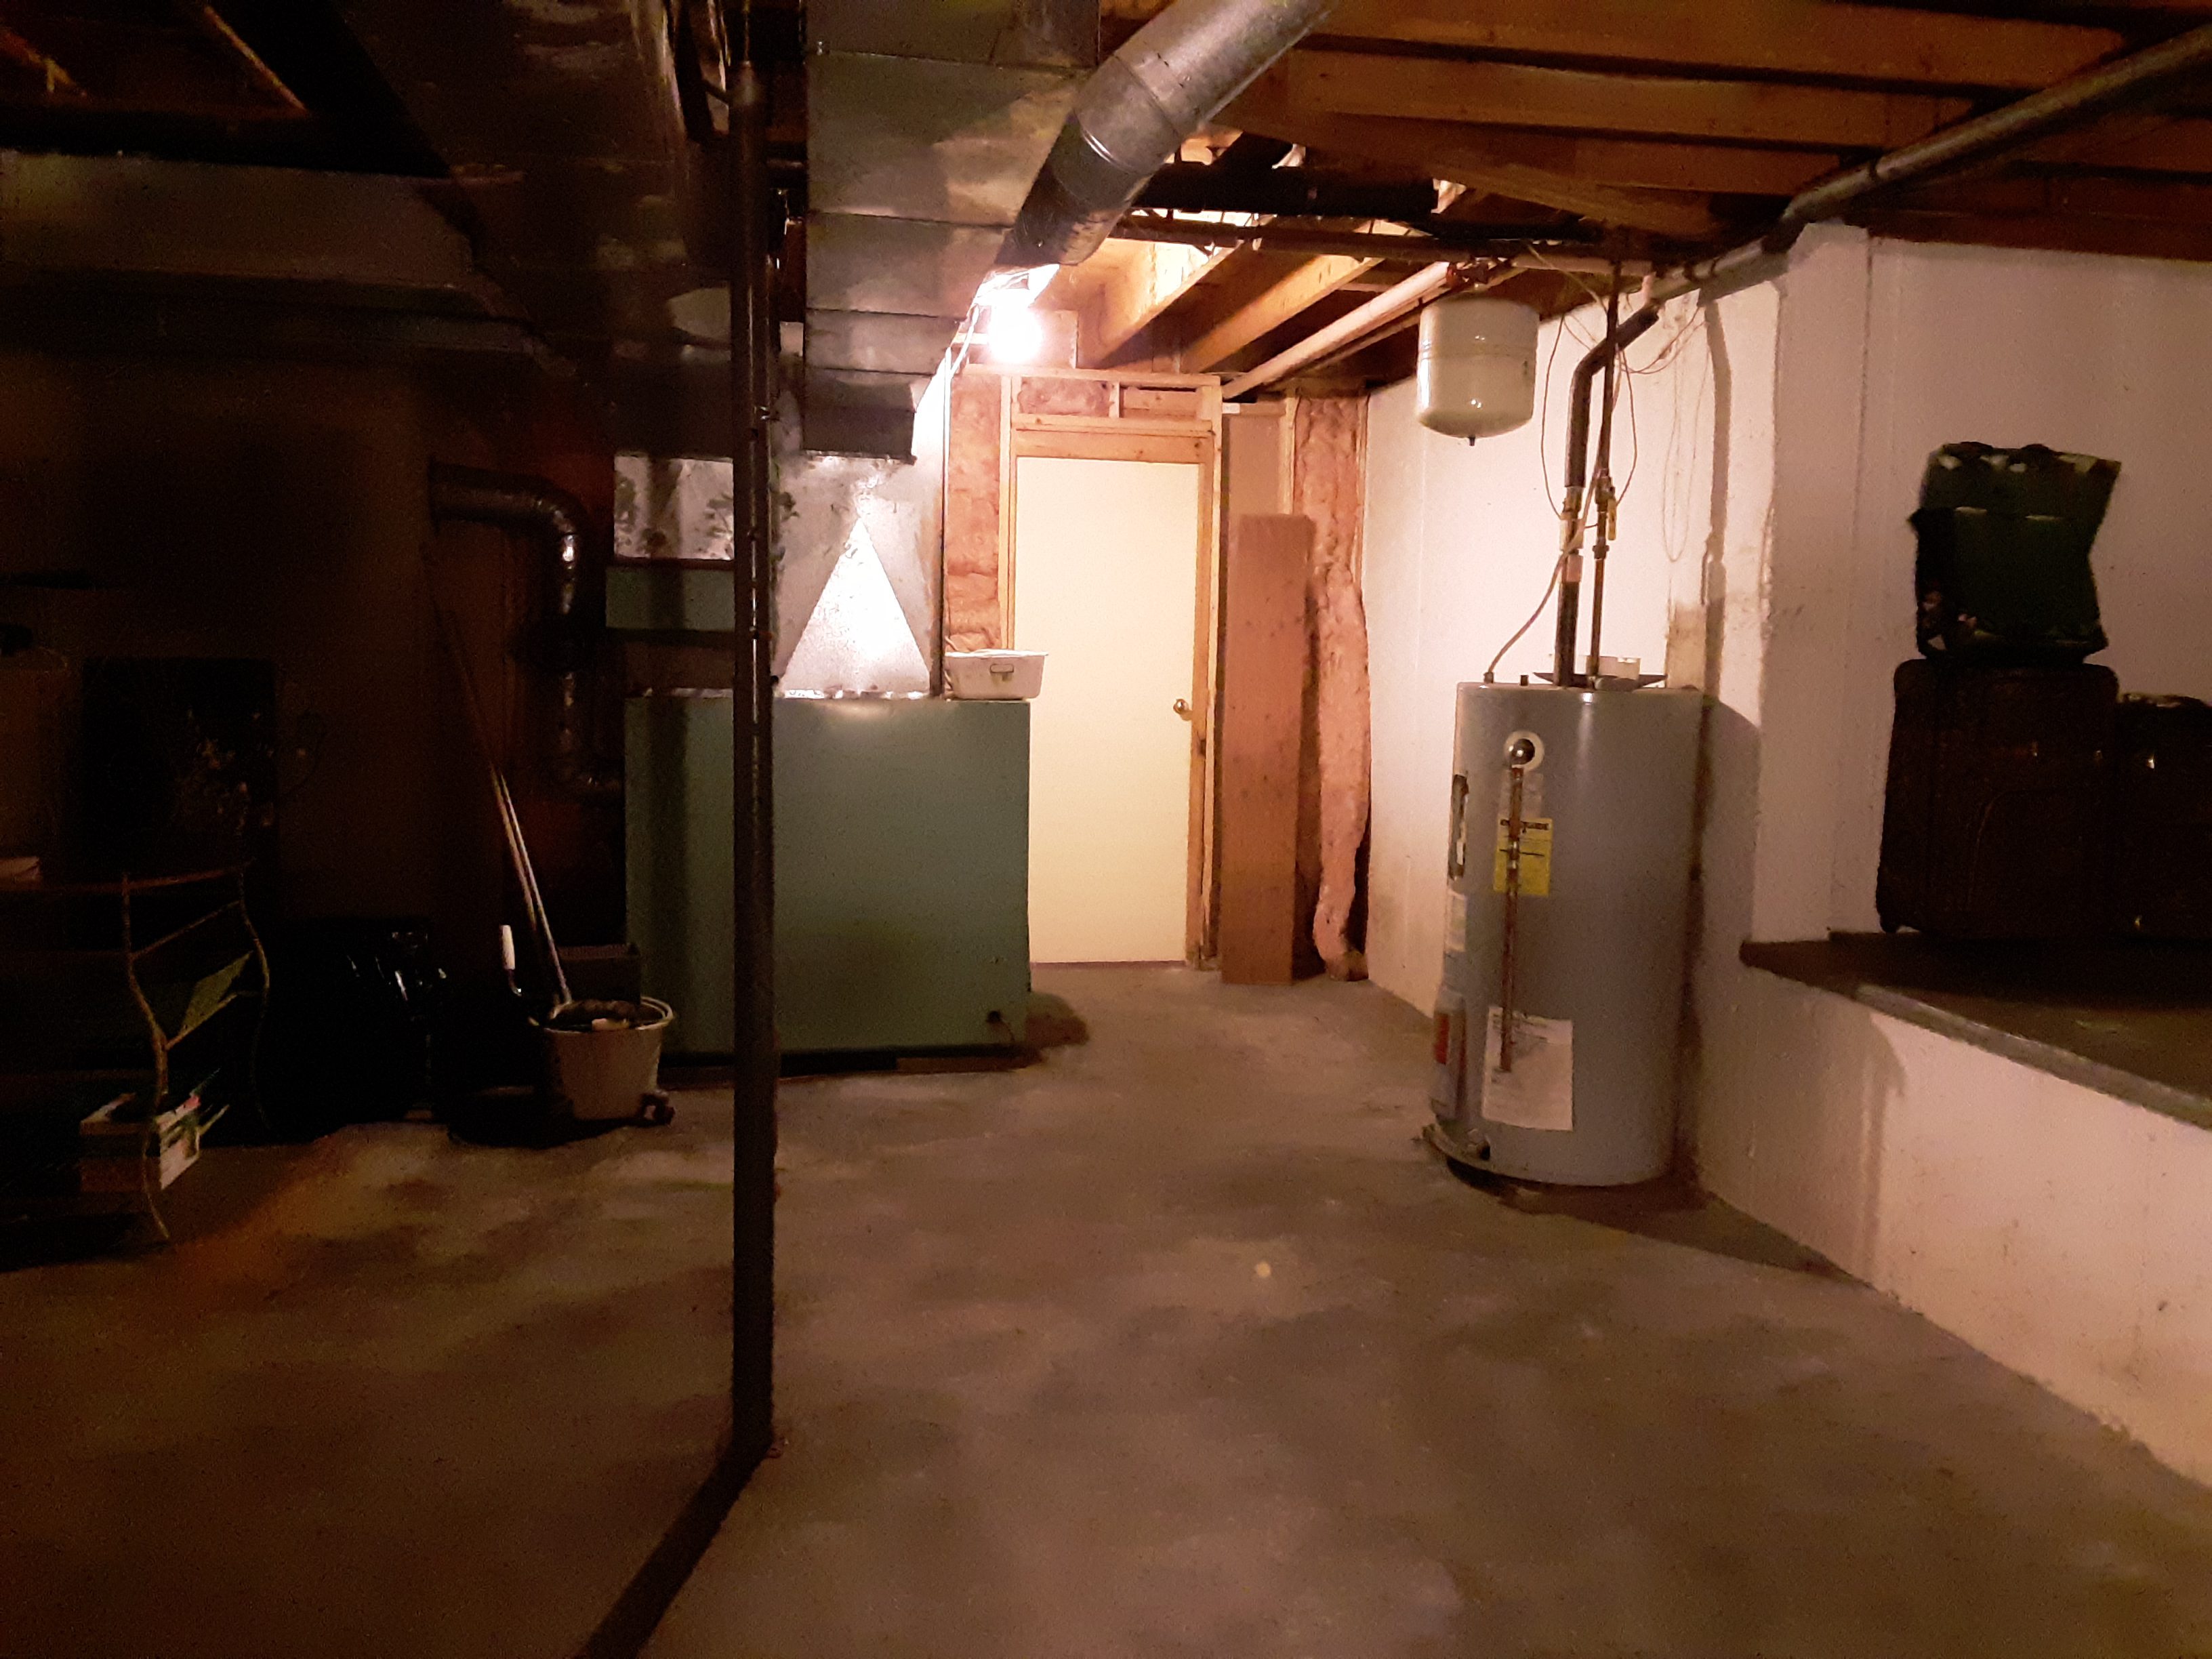 A cleared basement space!